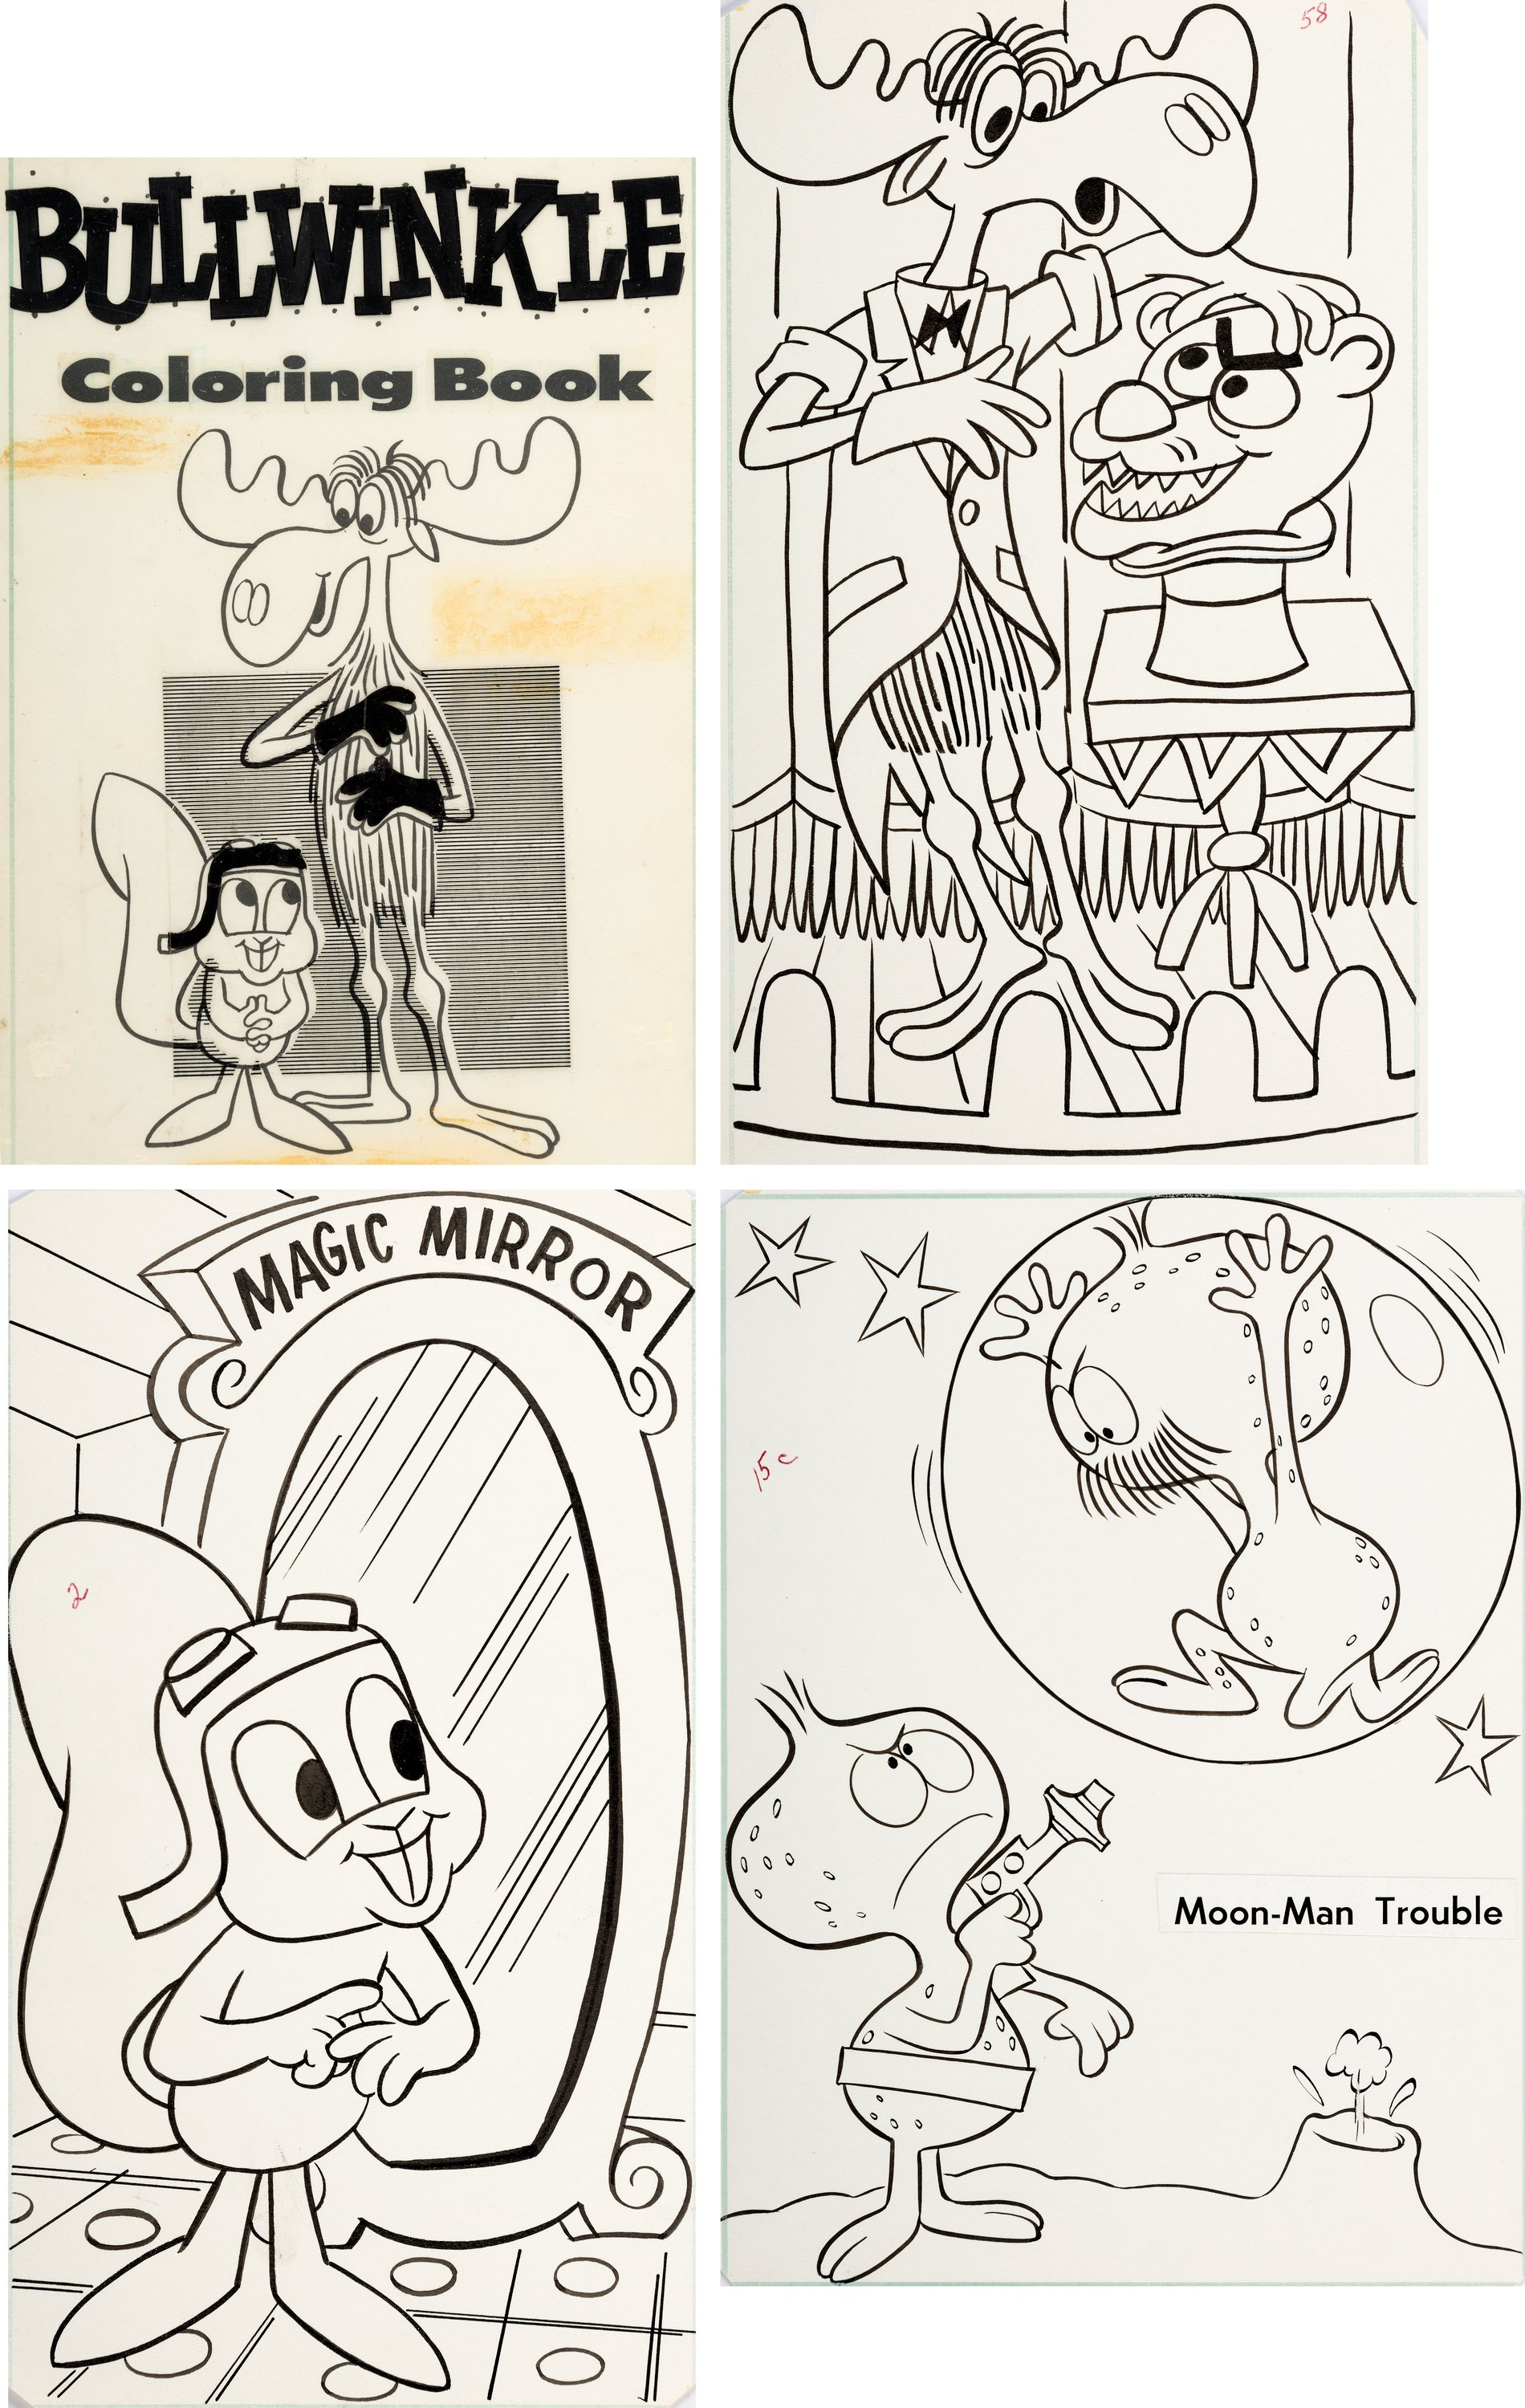 Gumby Coloring Pages 1960s Coloring Pages Books For Toddlers Free Teens Adults Pdf Near